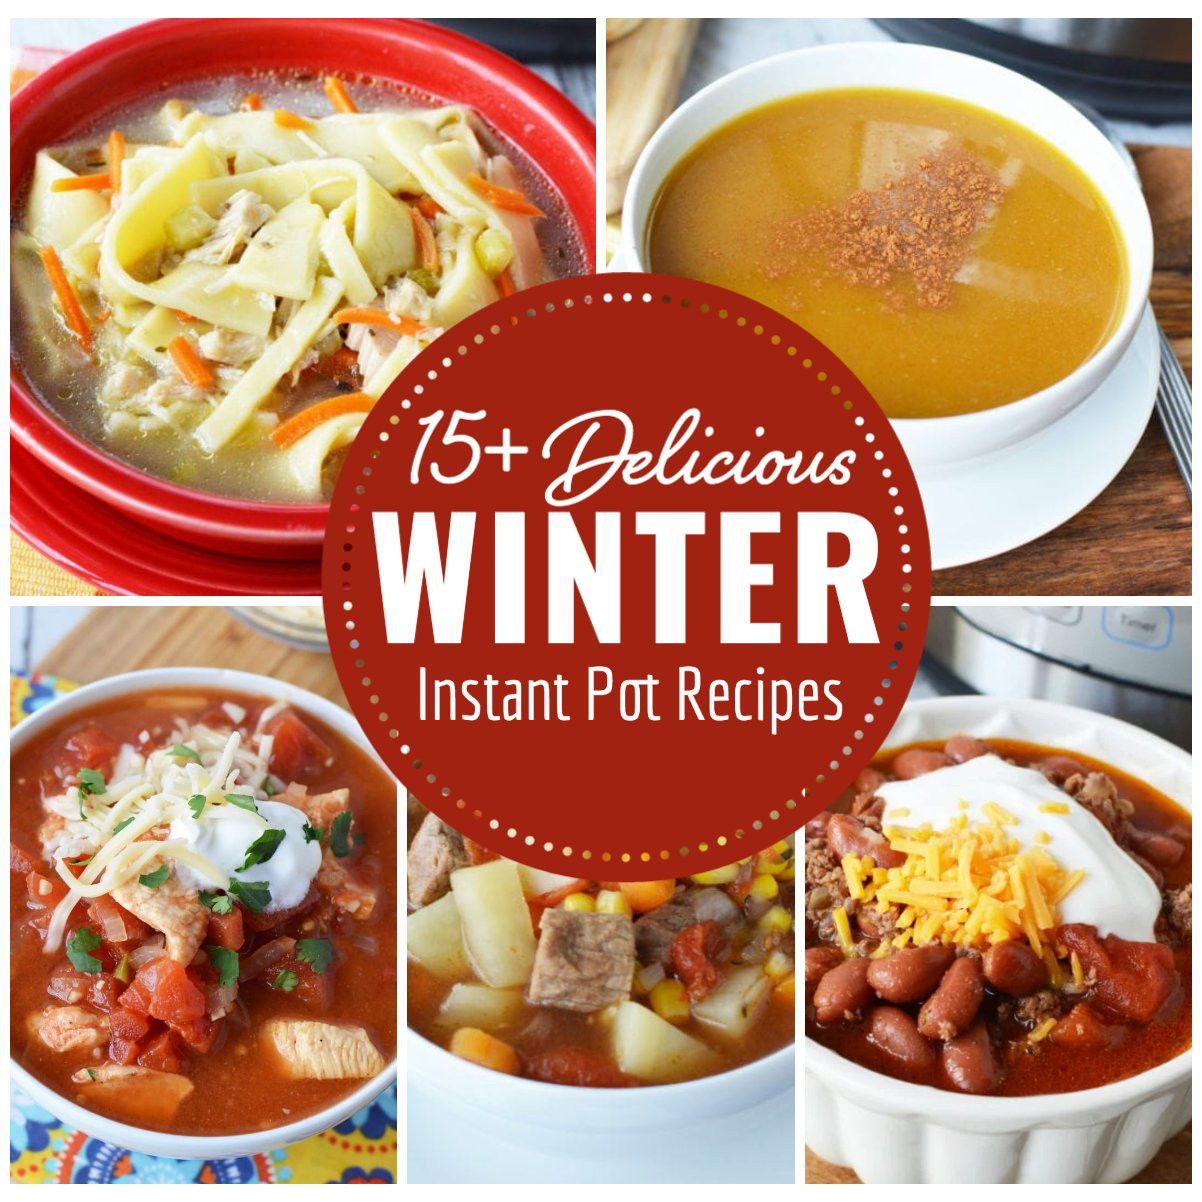 Winter Instant Pot Recipes
 Instant Pot Easy Dinners Breakfast Side Dishes Desserts